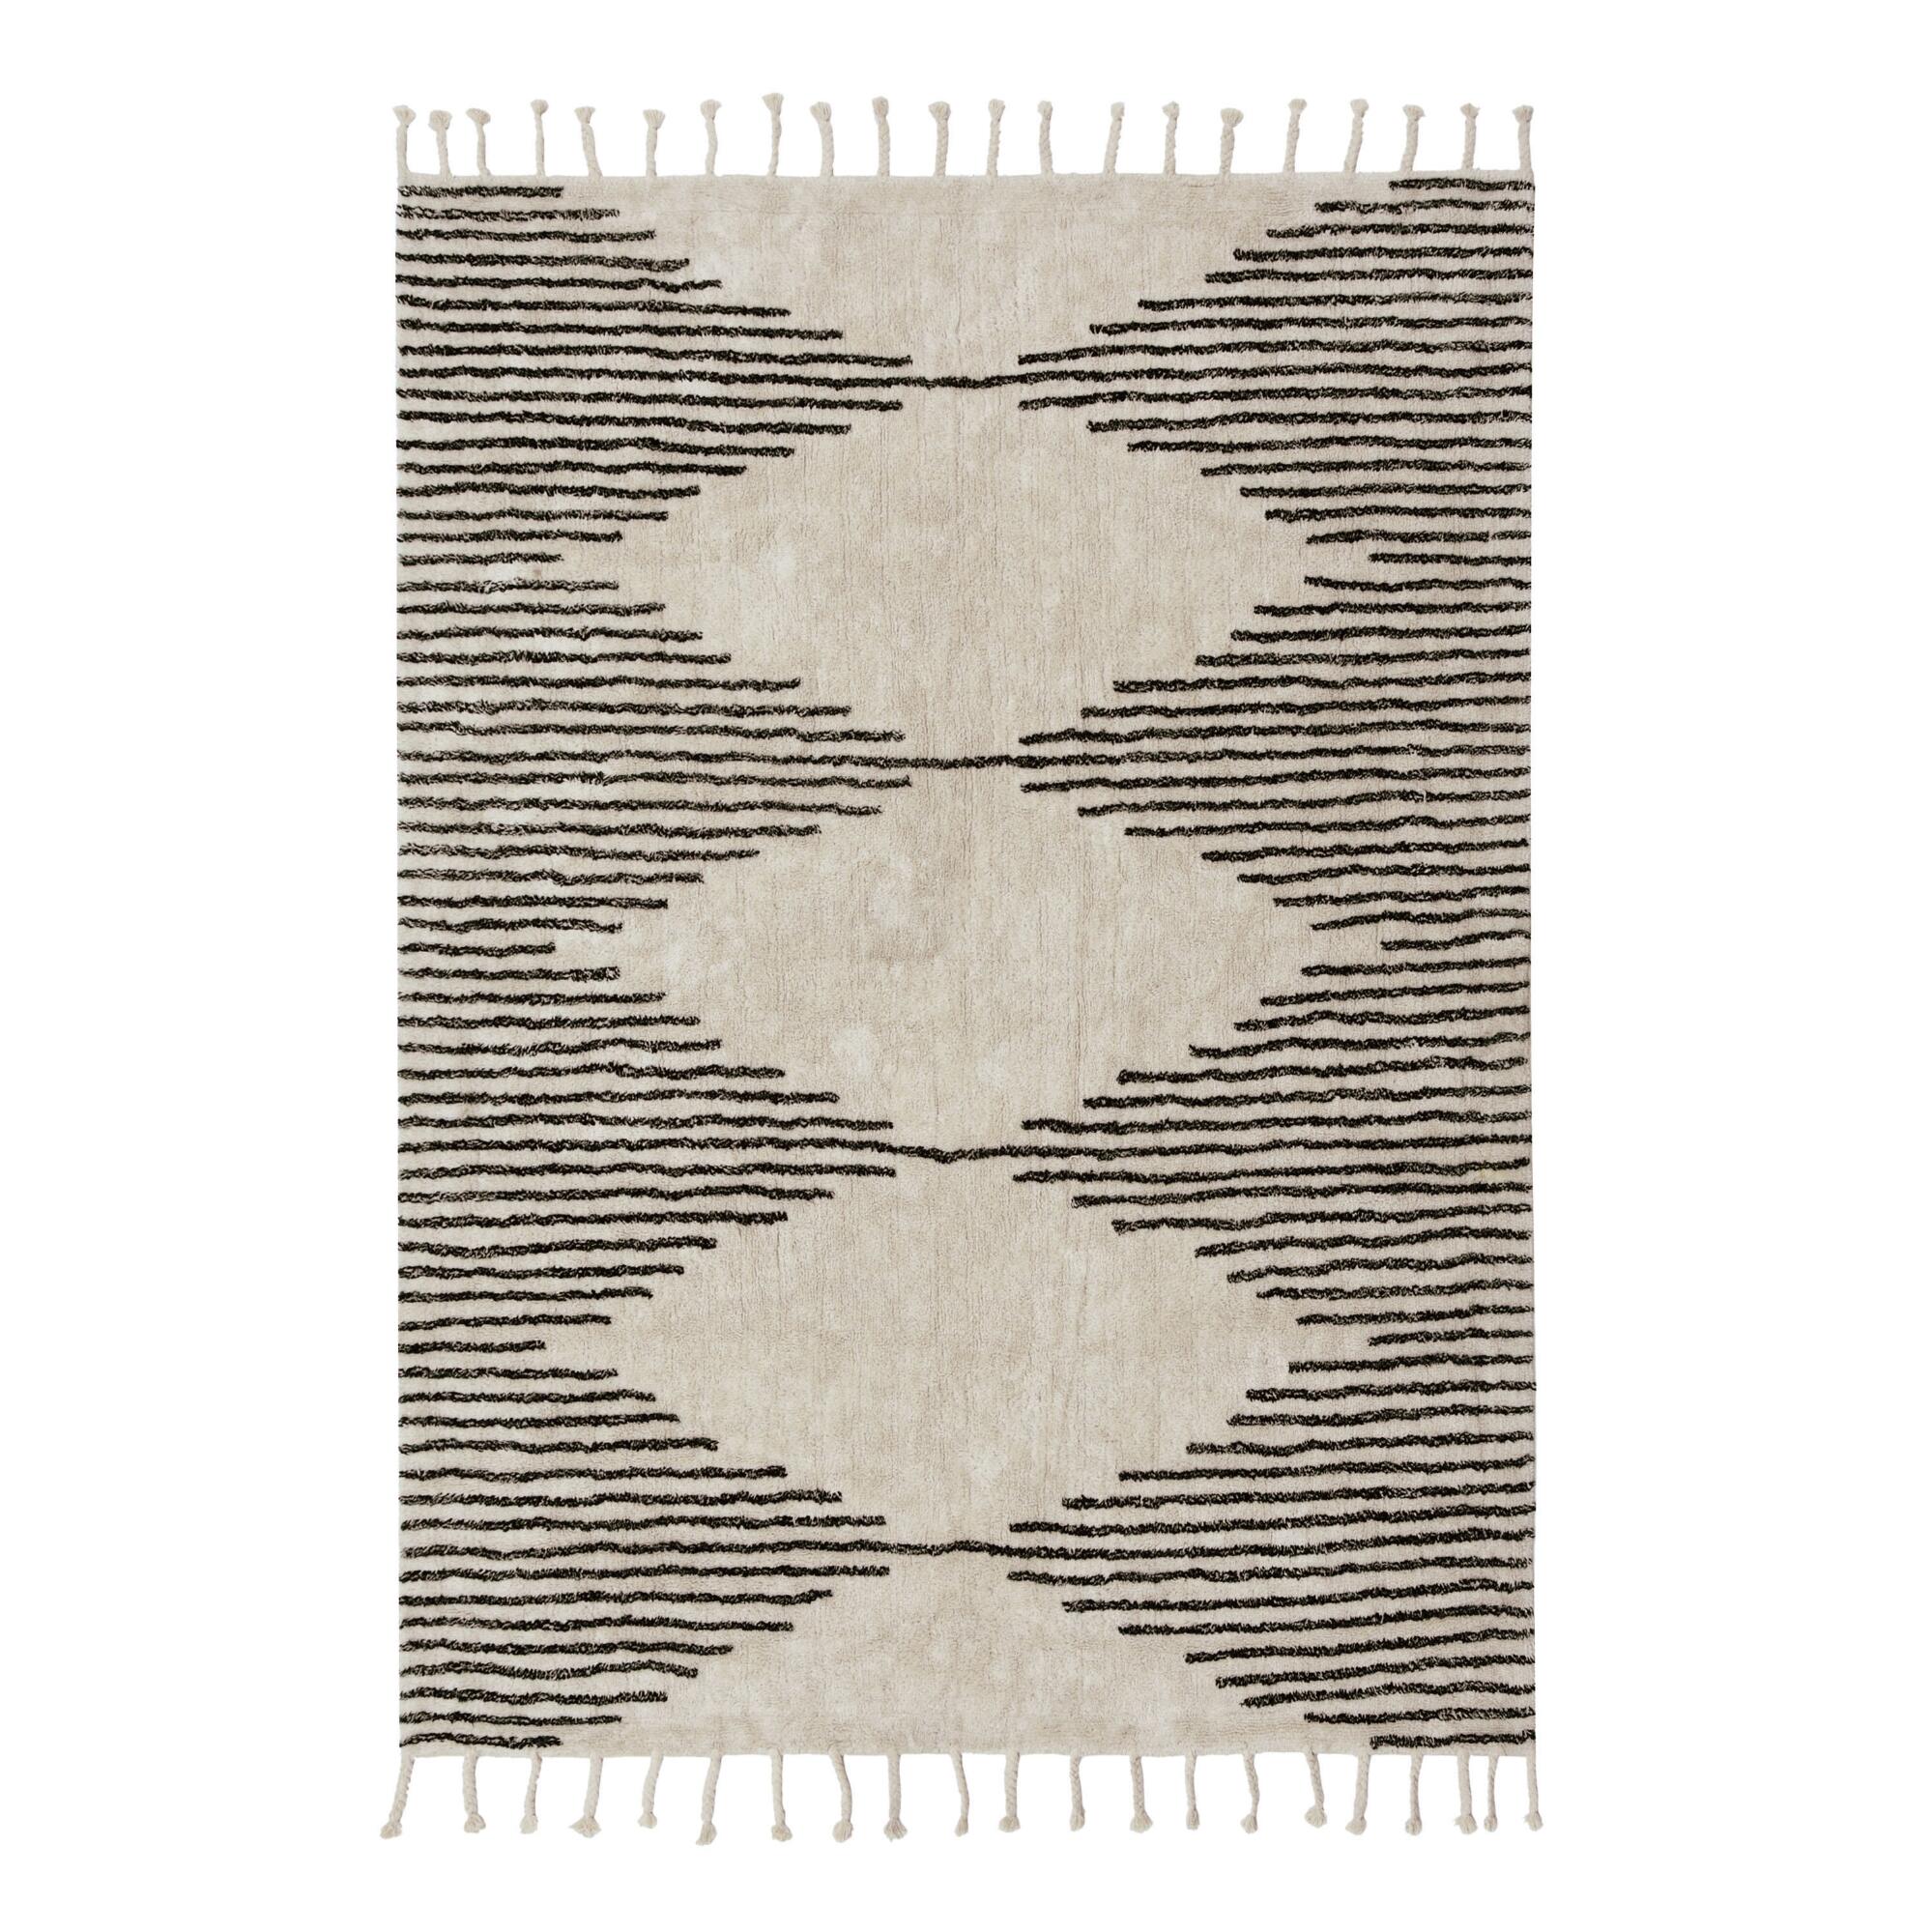 Black and Ivory Diamond Moroccan Style Cotton Shag Area Rug: White by World Market